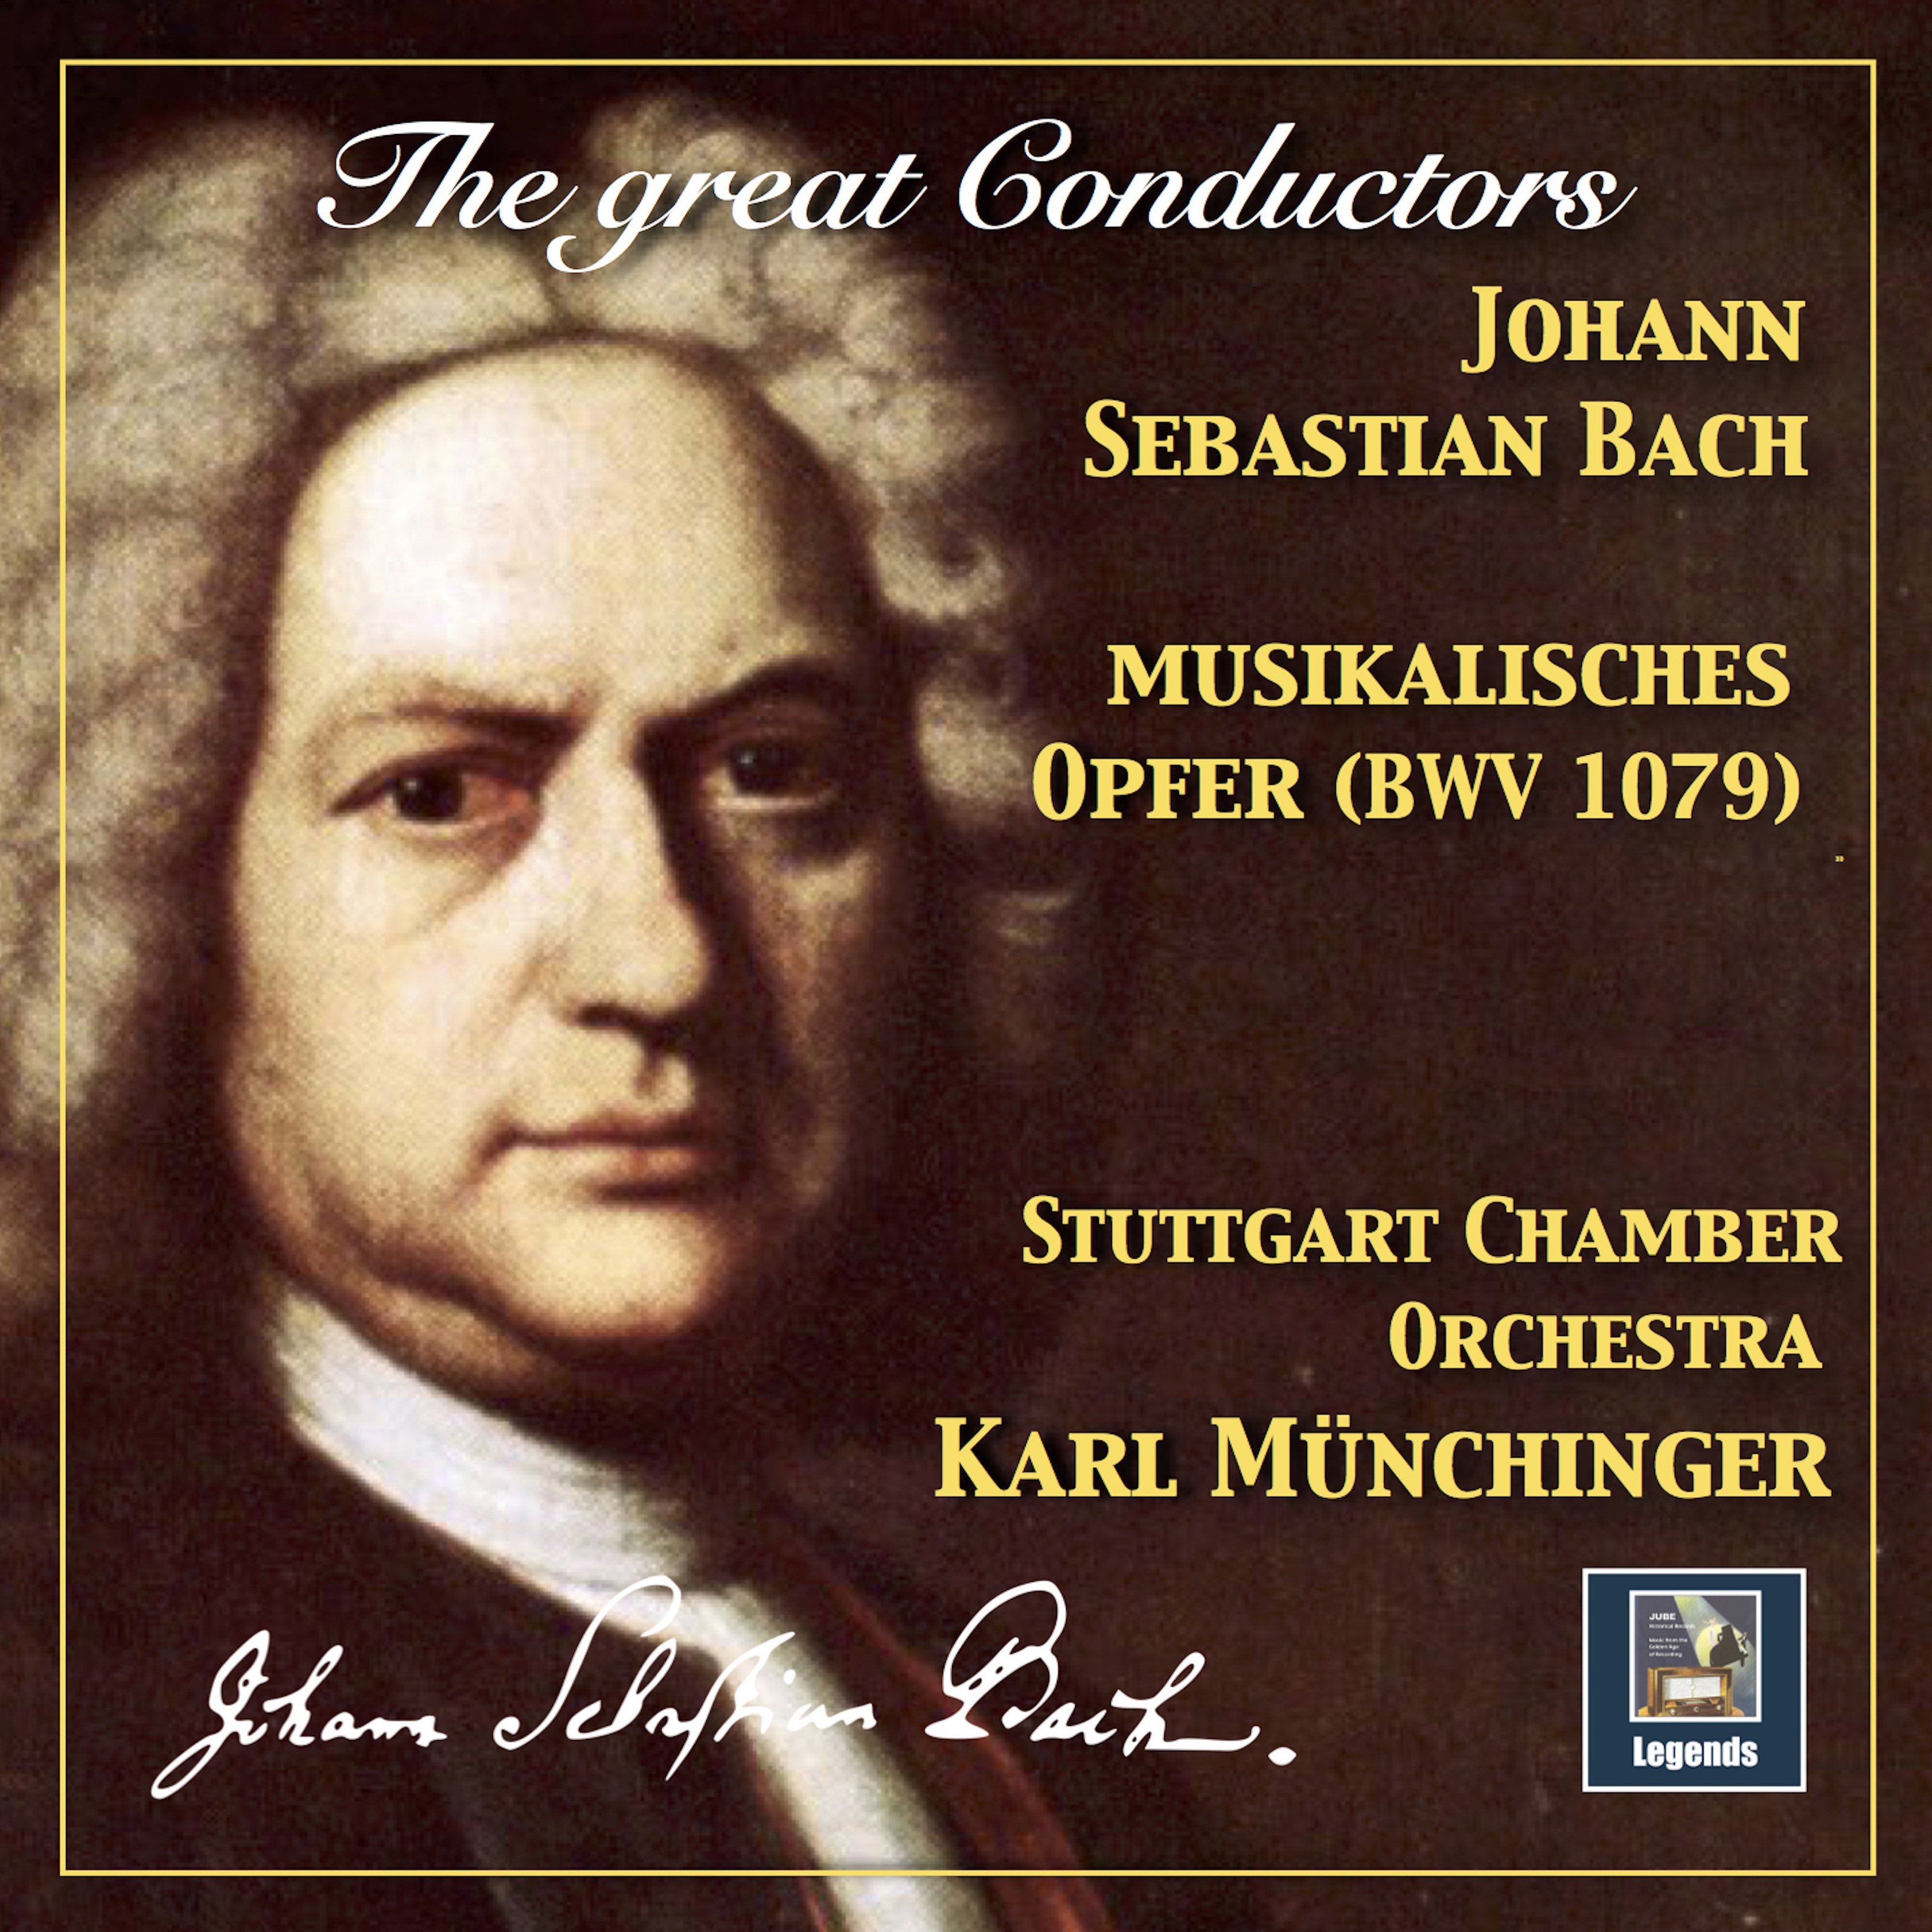 Musikalisches Opfer, BWV 1079 Arr. K. Mü nchinger for Chamber Orchestra: Canon per 2 violini in unisono